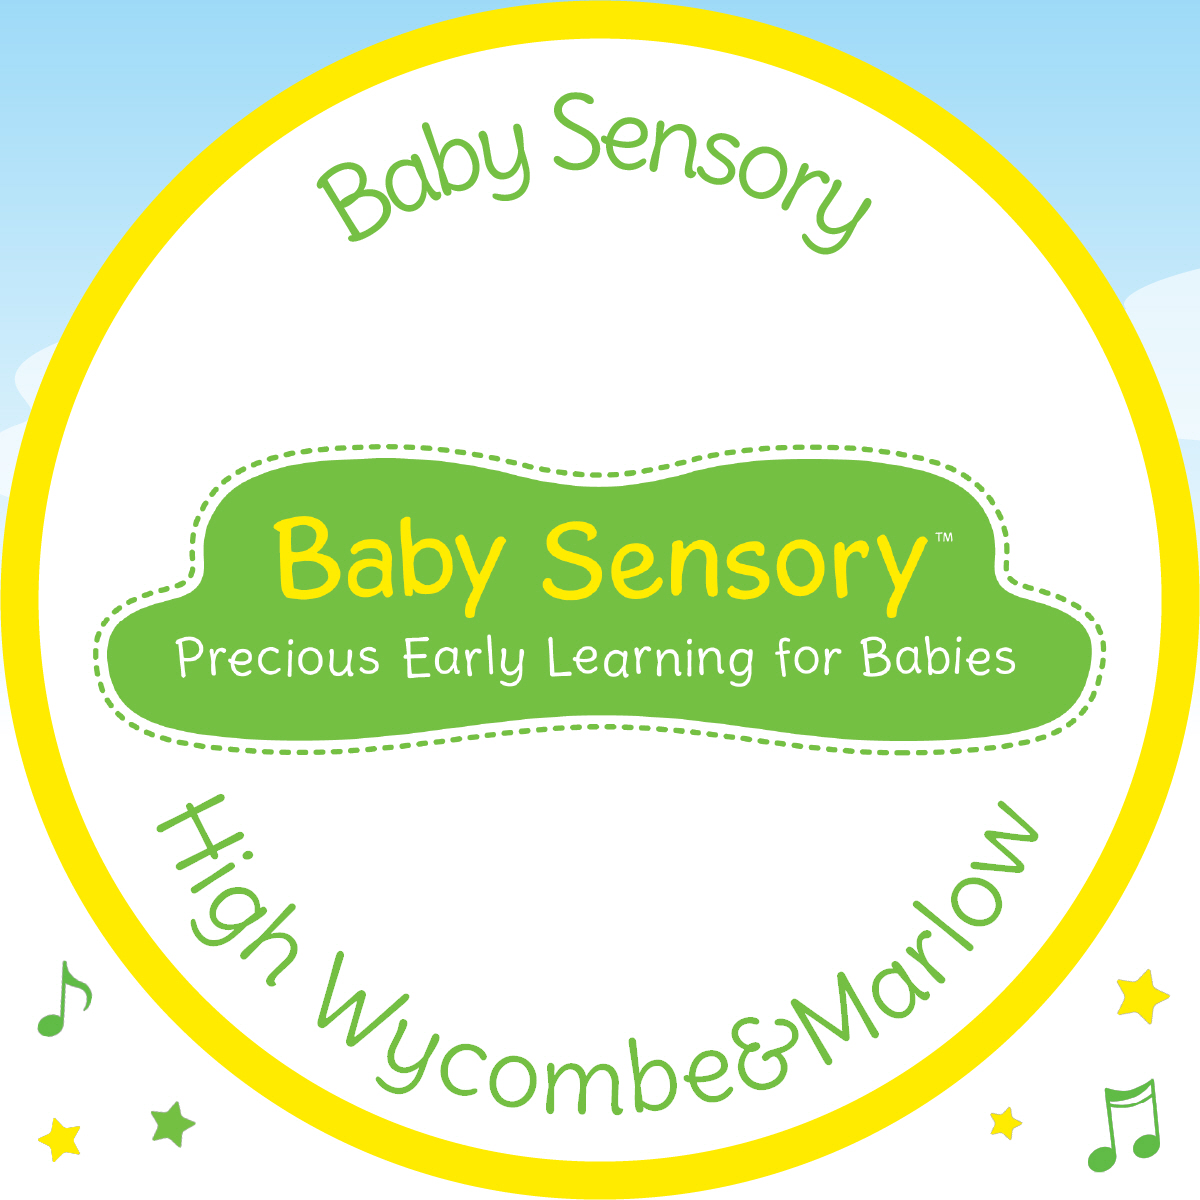 Baby Sensory High Wycombe and Marlow's logo